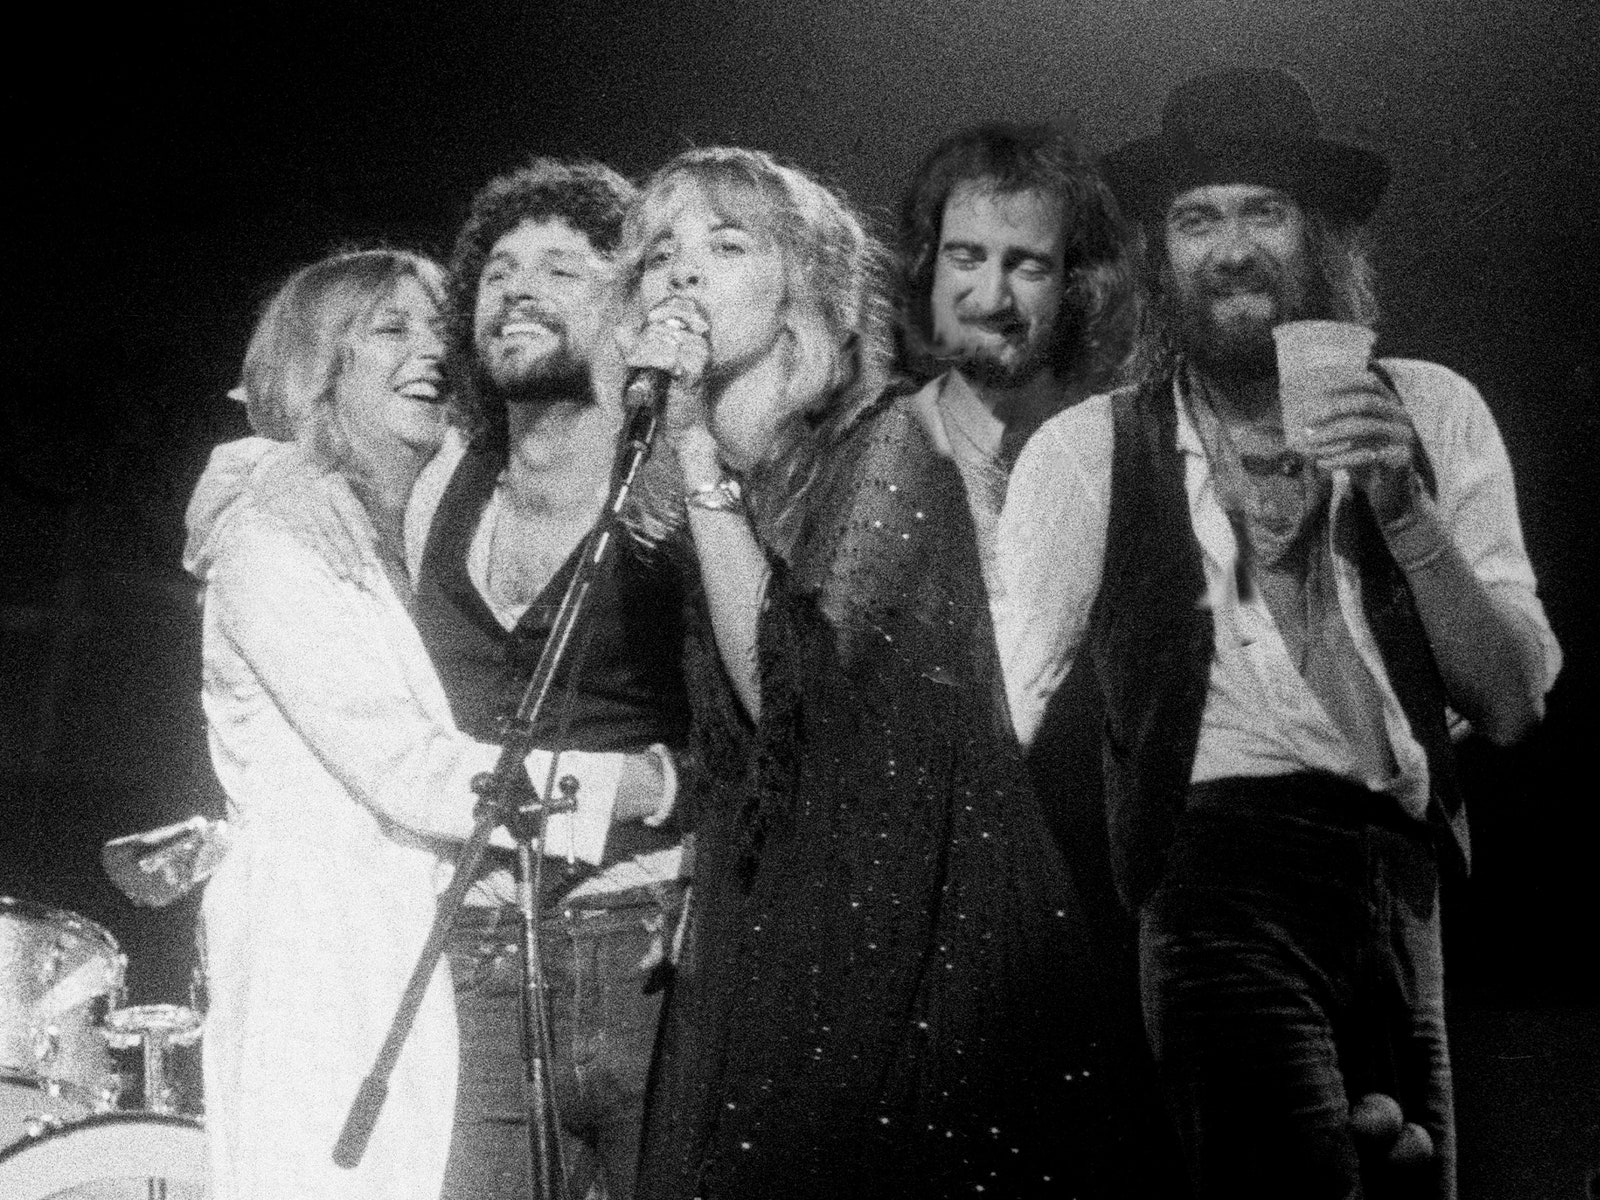 The biggest dramas from Fleetwood Mac's career that inspired Daisy Jones &amp; the Six